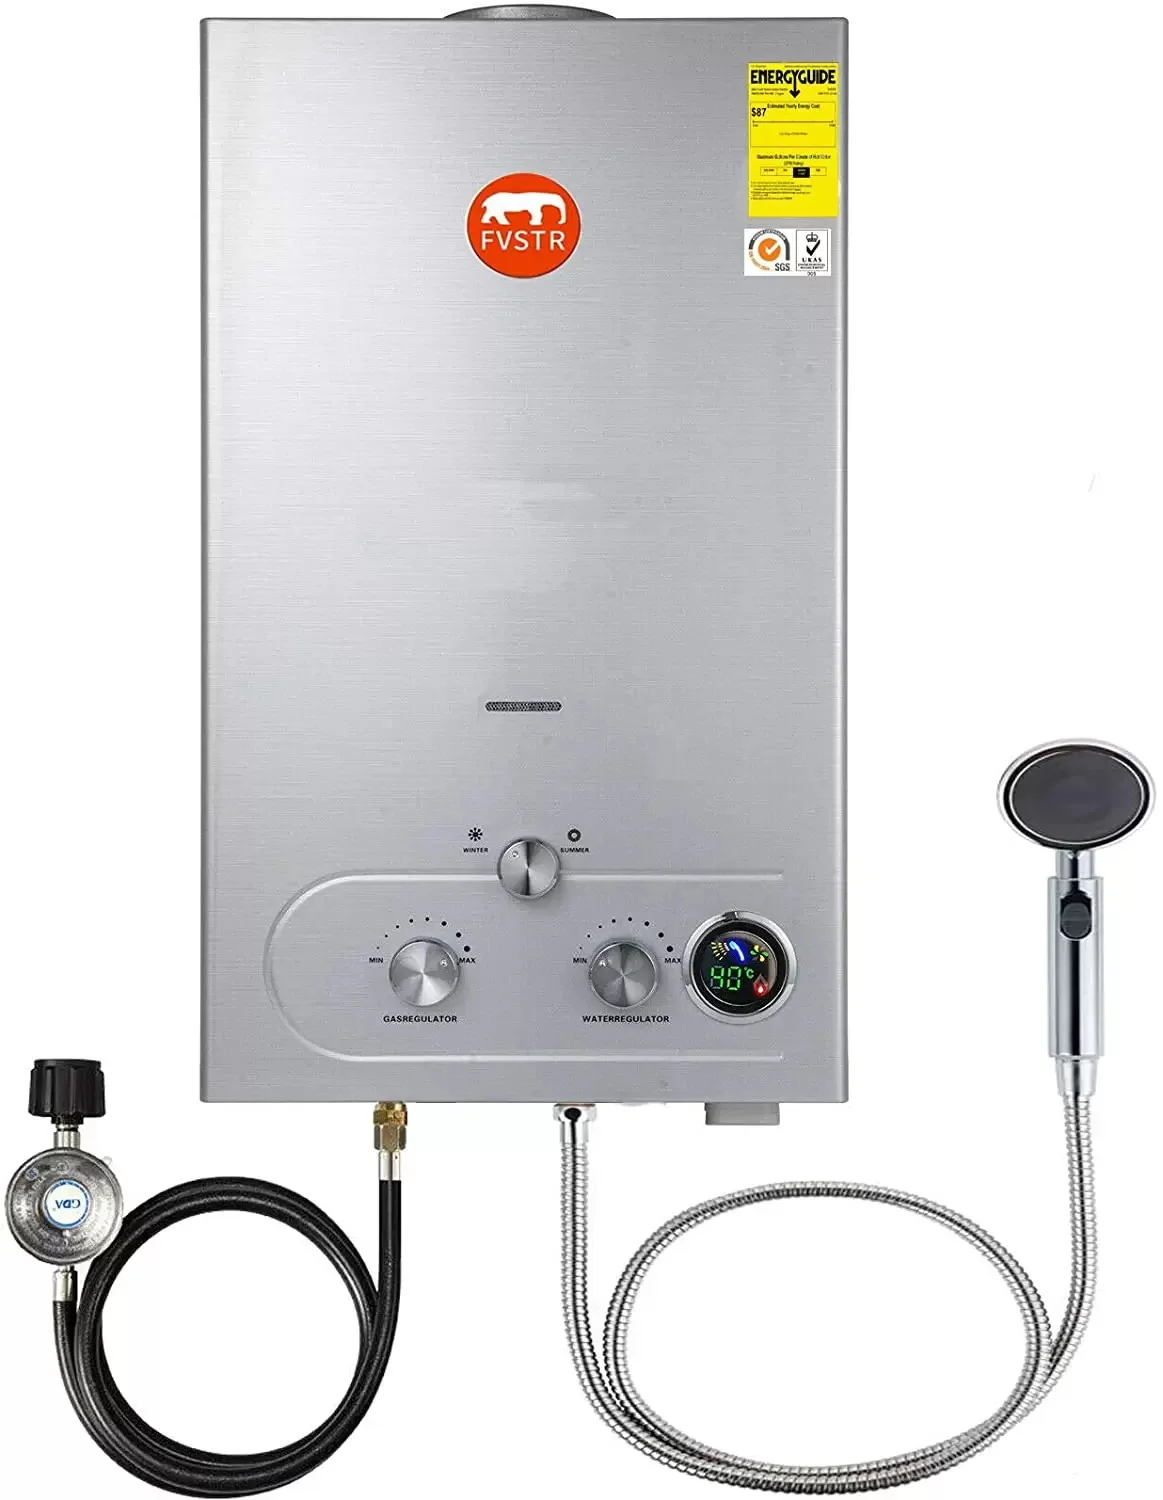 6L 8L 12L 12 KW LPG Tankless Hot Water Heater RV's & Campers Propane Gas CE approved home appliance